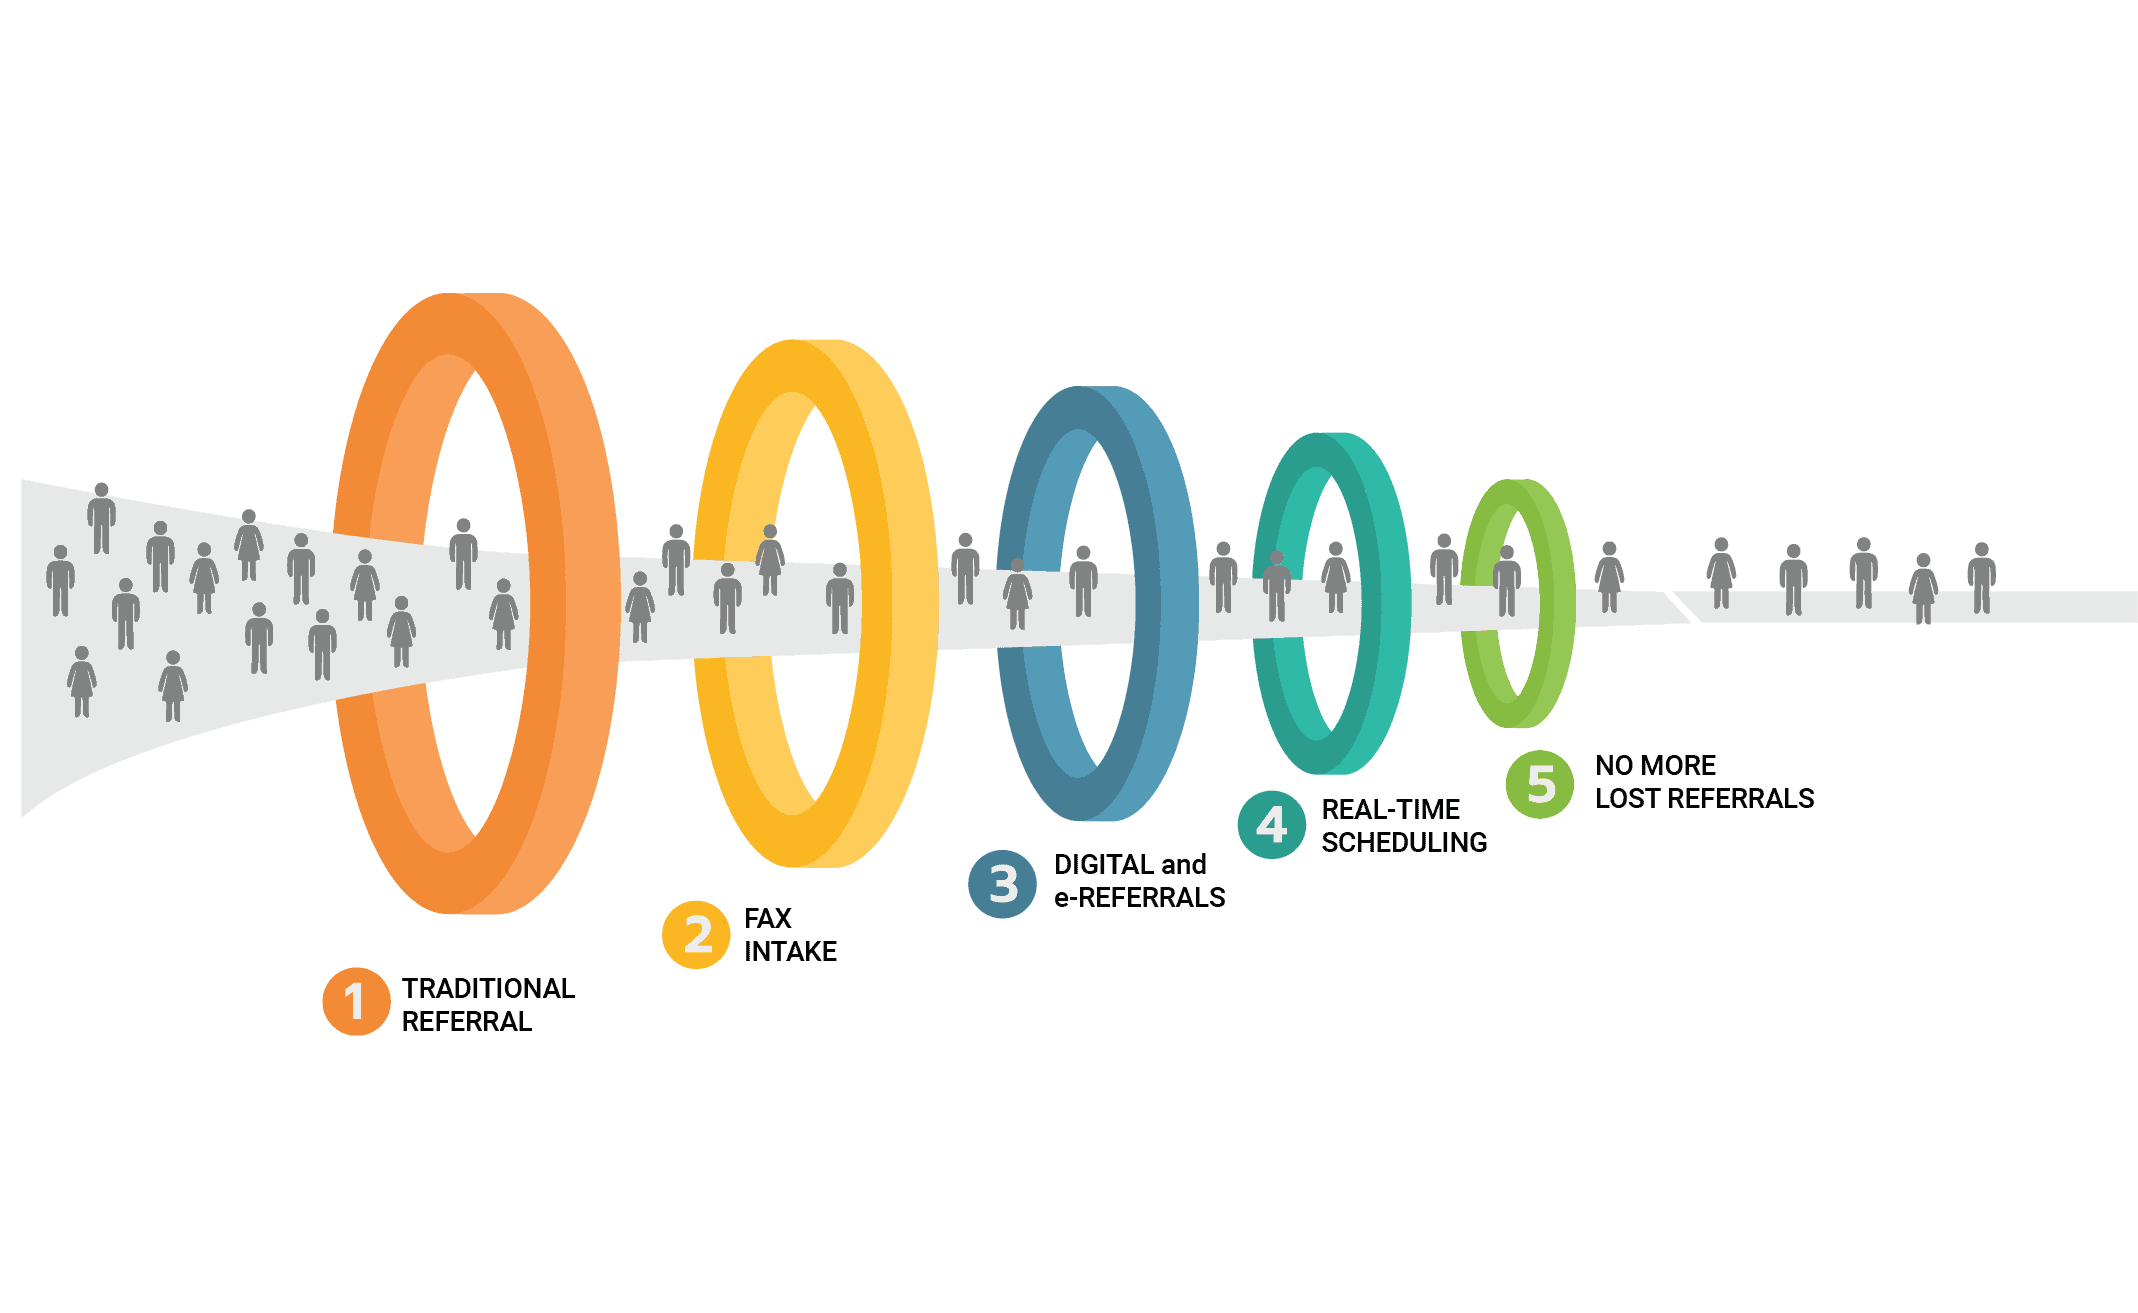 Sophrona Referral Funnel. A sales funnel is displayed with various rings illustrating how referrals enter the practice. The top of the funnel shows rings that are large to small in orange, yellow, blue, teal and green. It begins with Traditional Referrals at the top descending to Fax Intake, e-Referrals, Real-Time scheduling and no more lost referrals at the bottom.